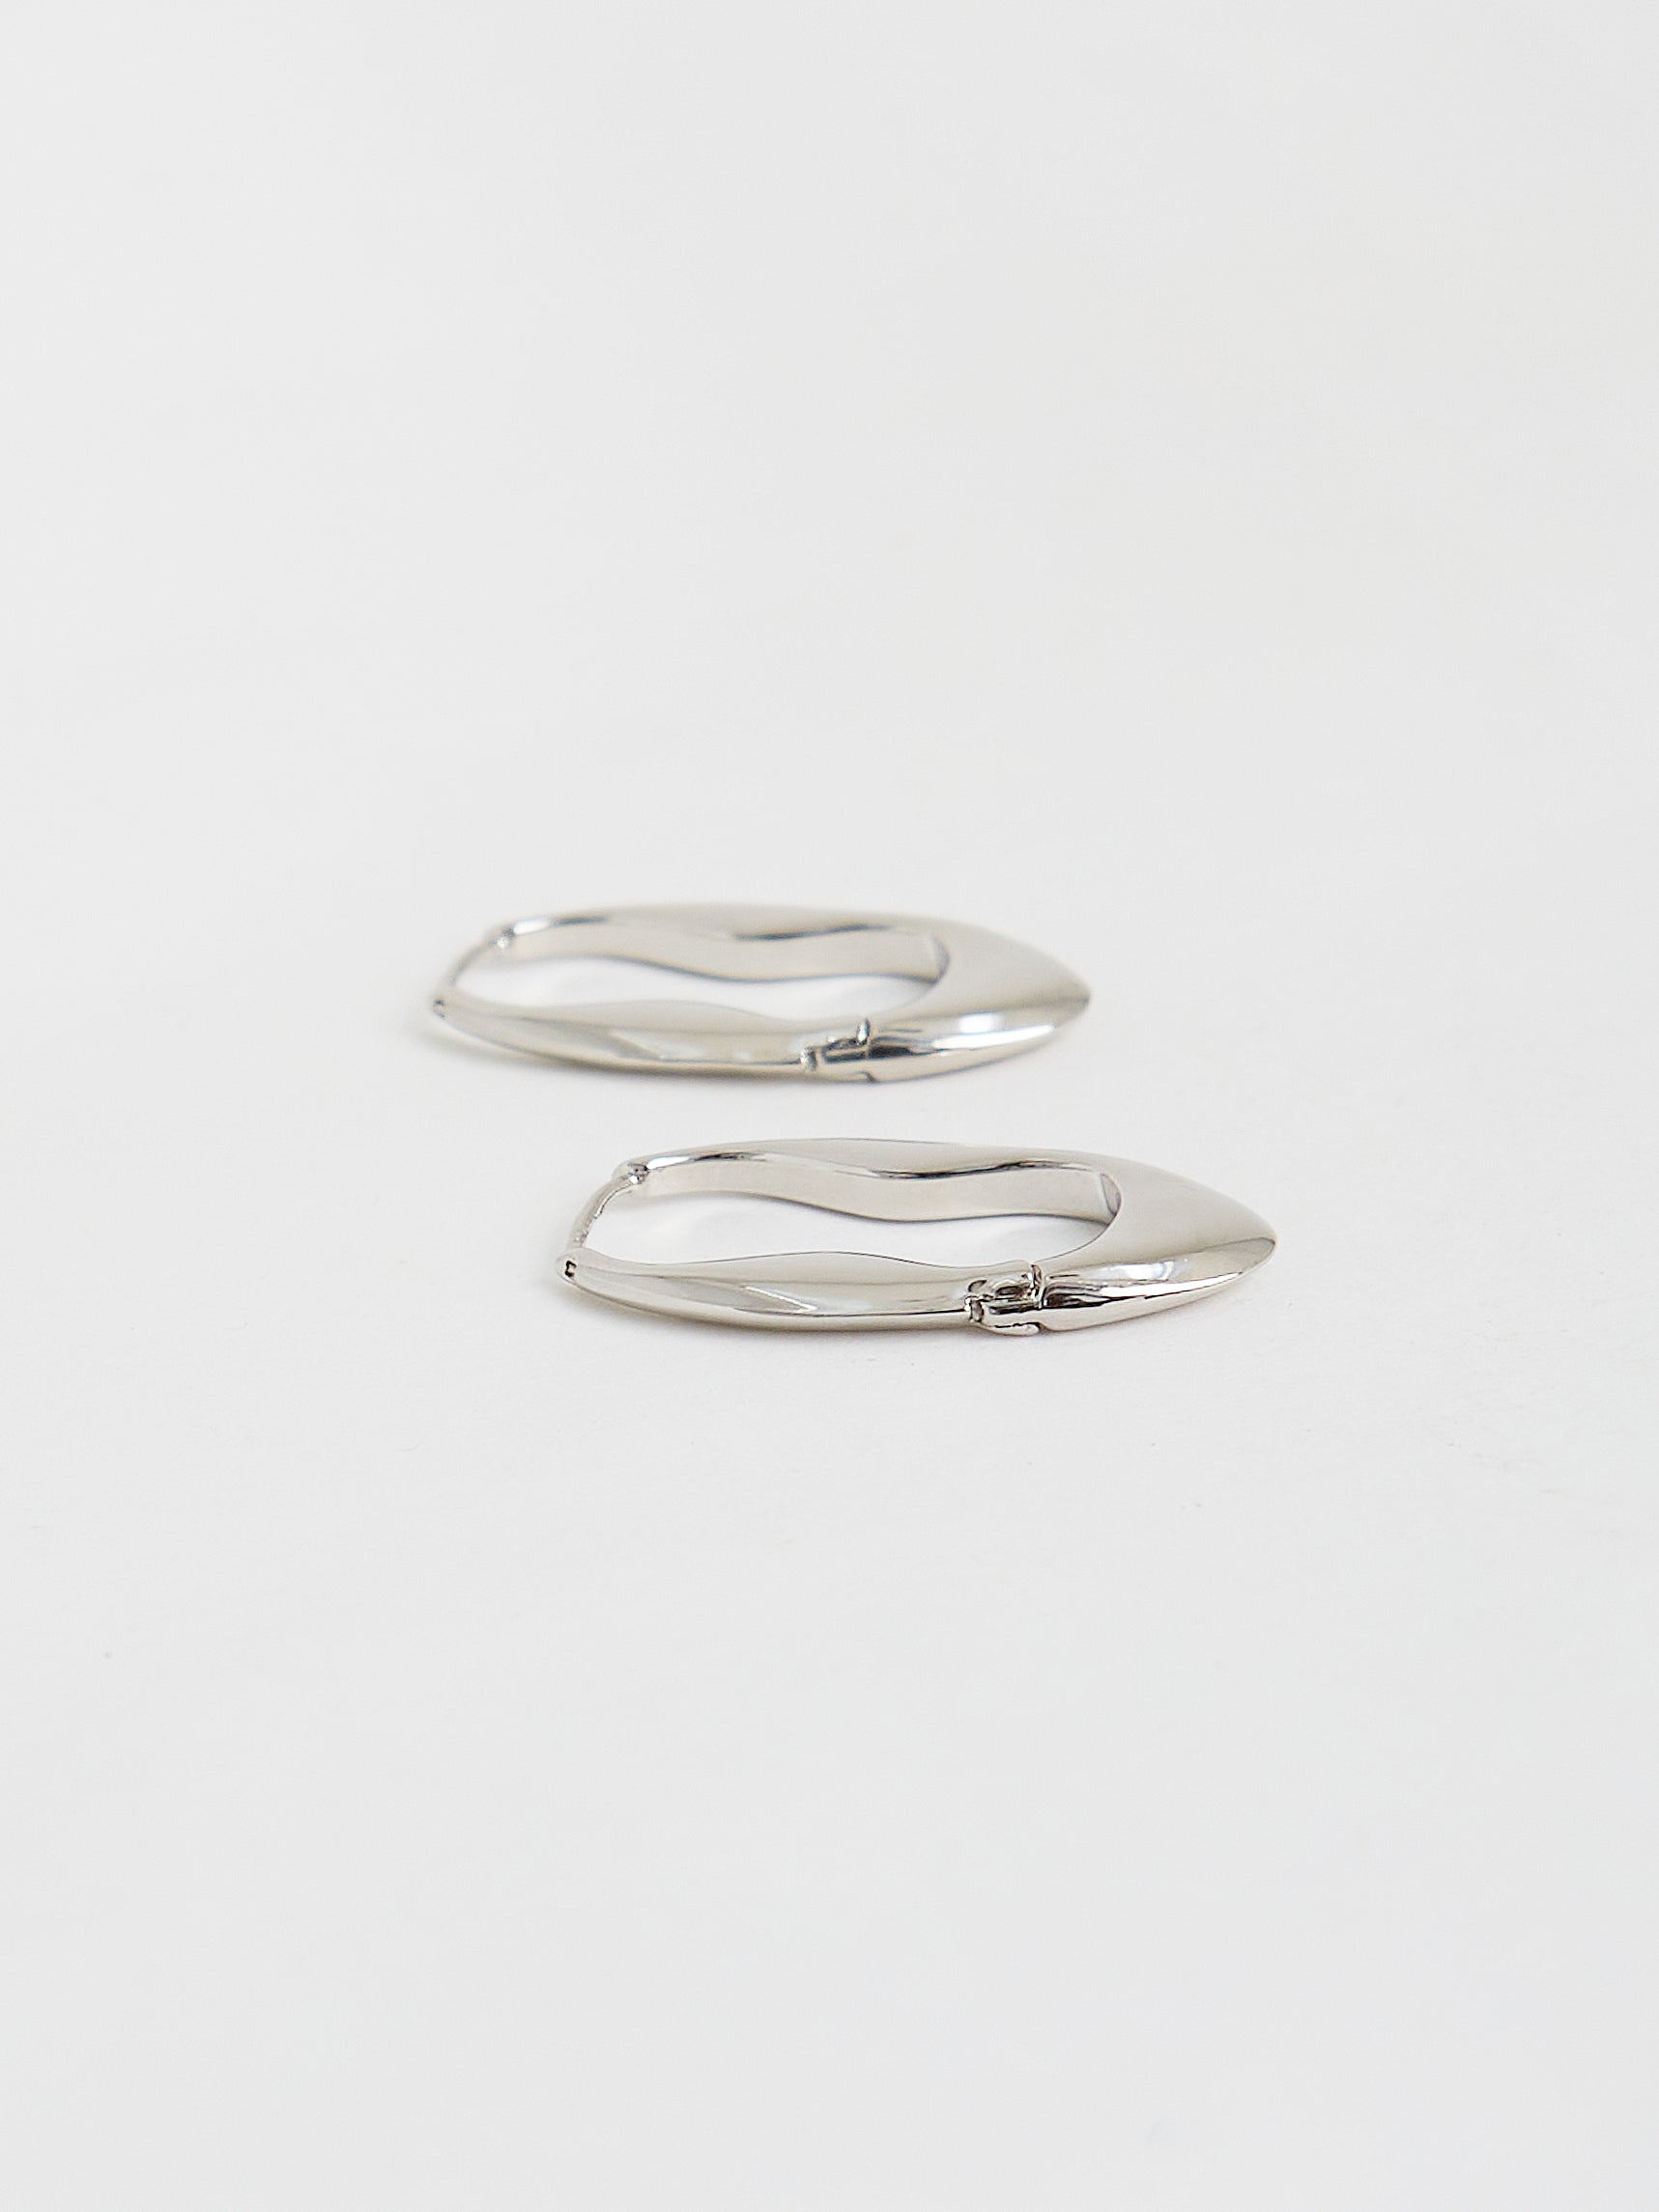 Abstract Clip Earrings (Silver)